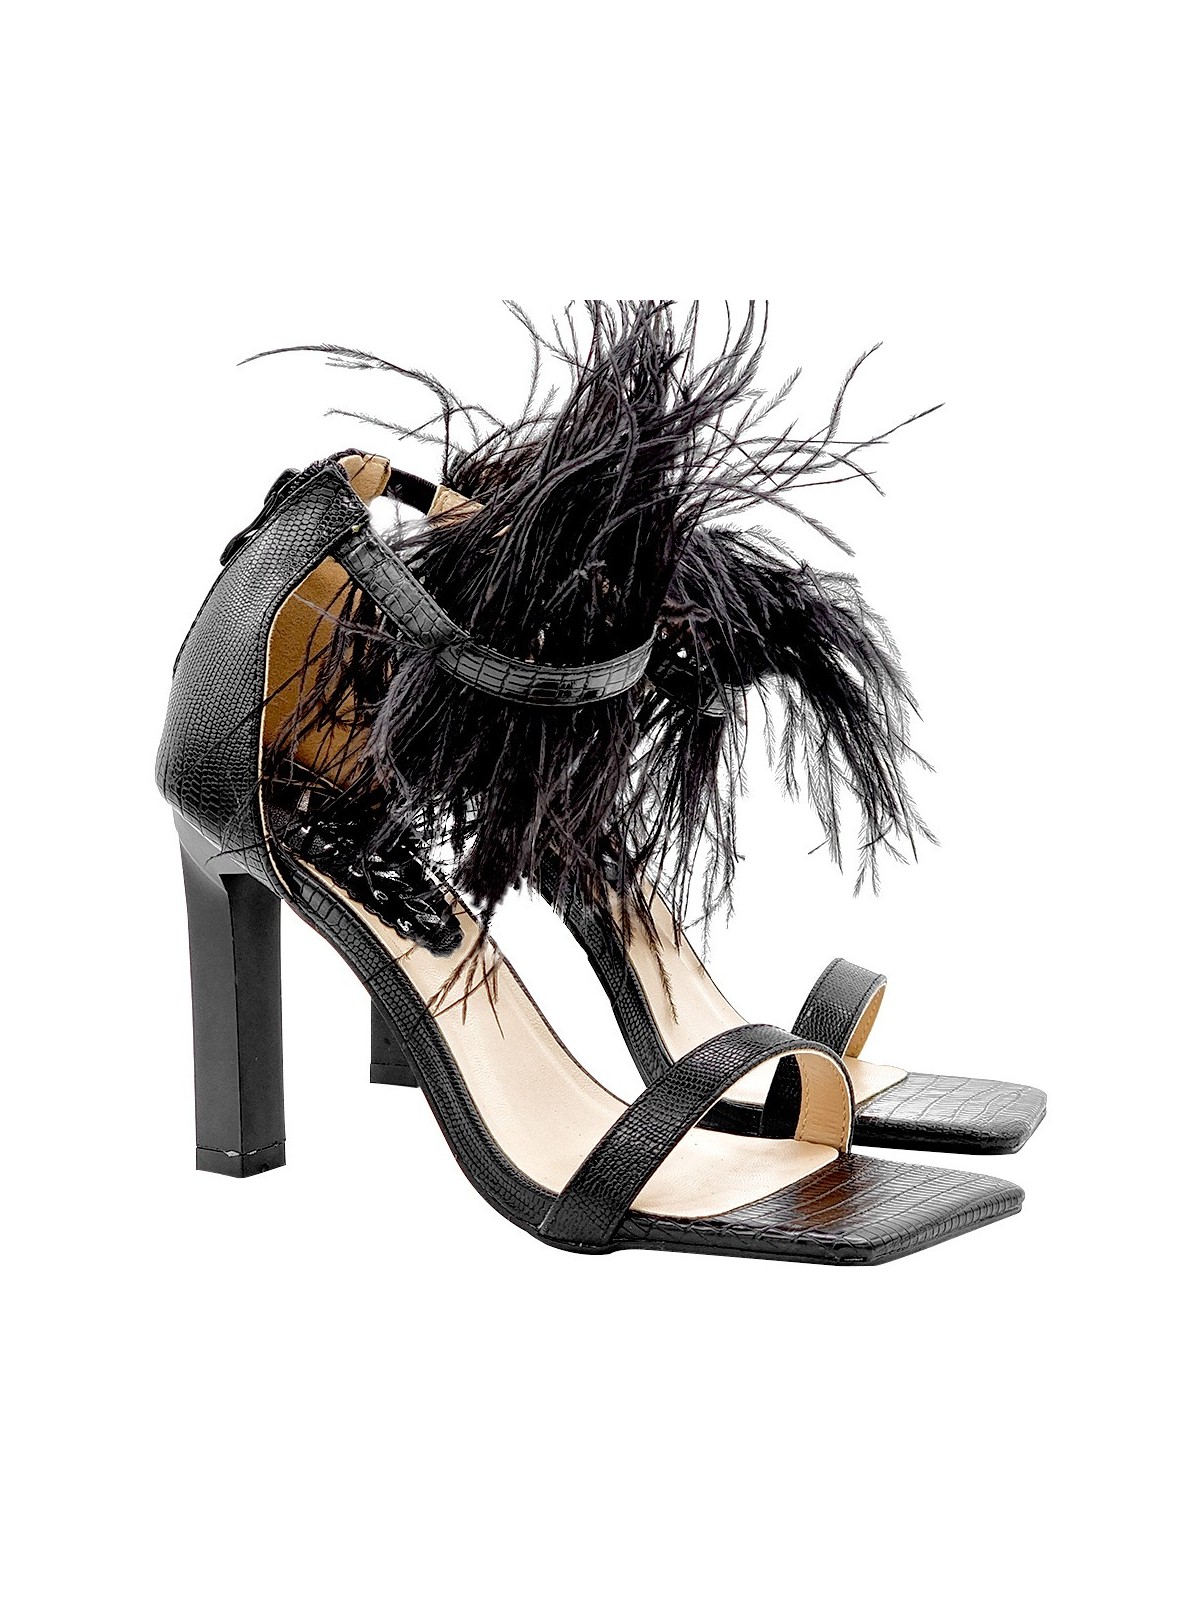 BLACK SANDALS WITH FEATHERS